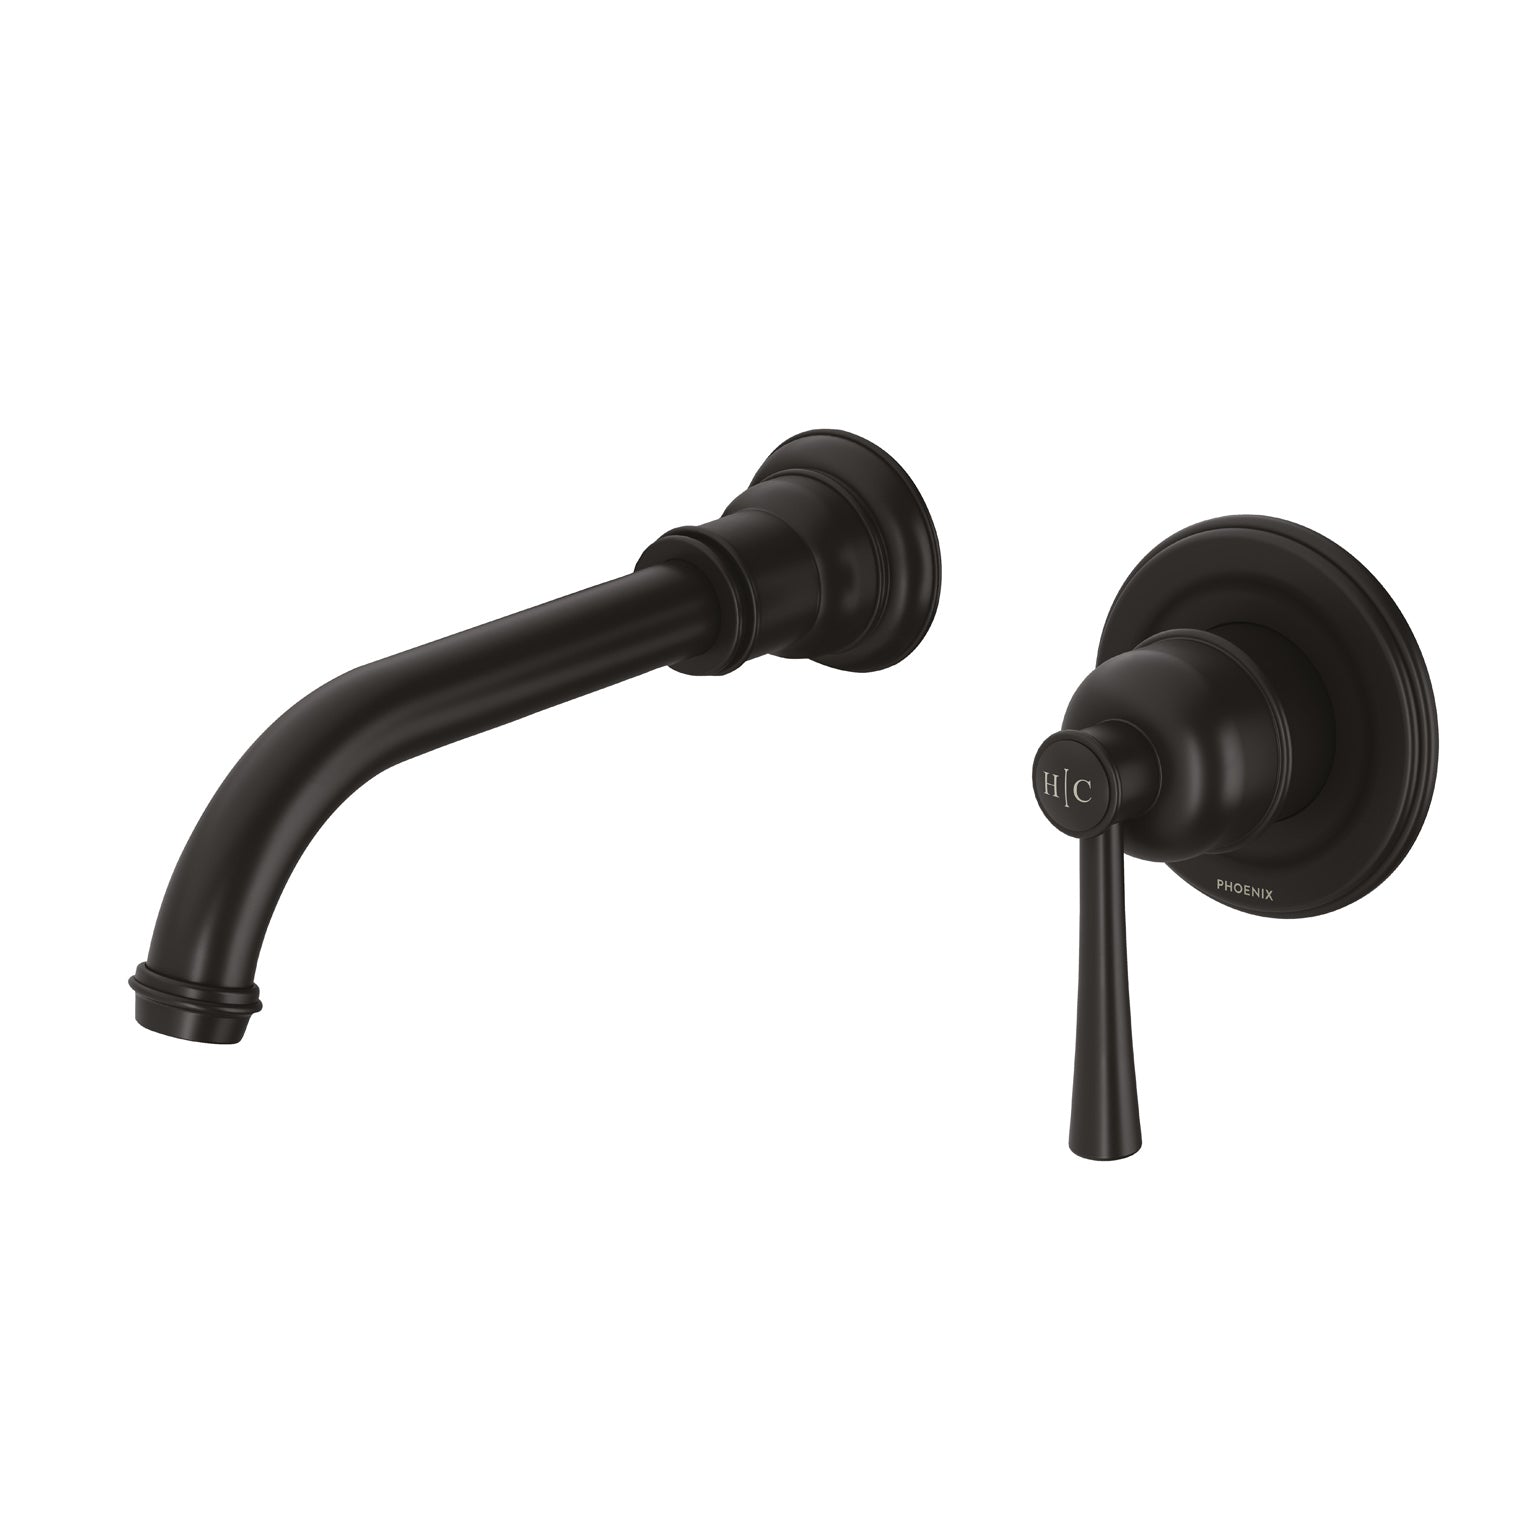 PHOENIX CROMFORD SWITCHMIX WALL BASIN MIXER SET FIT-OFF AND ROUGH-IN KIT 200MM MATTE BLACK